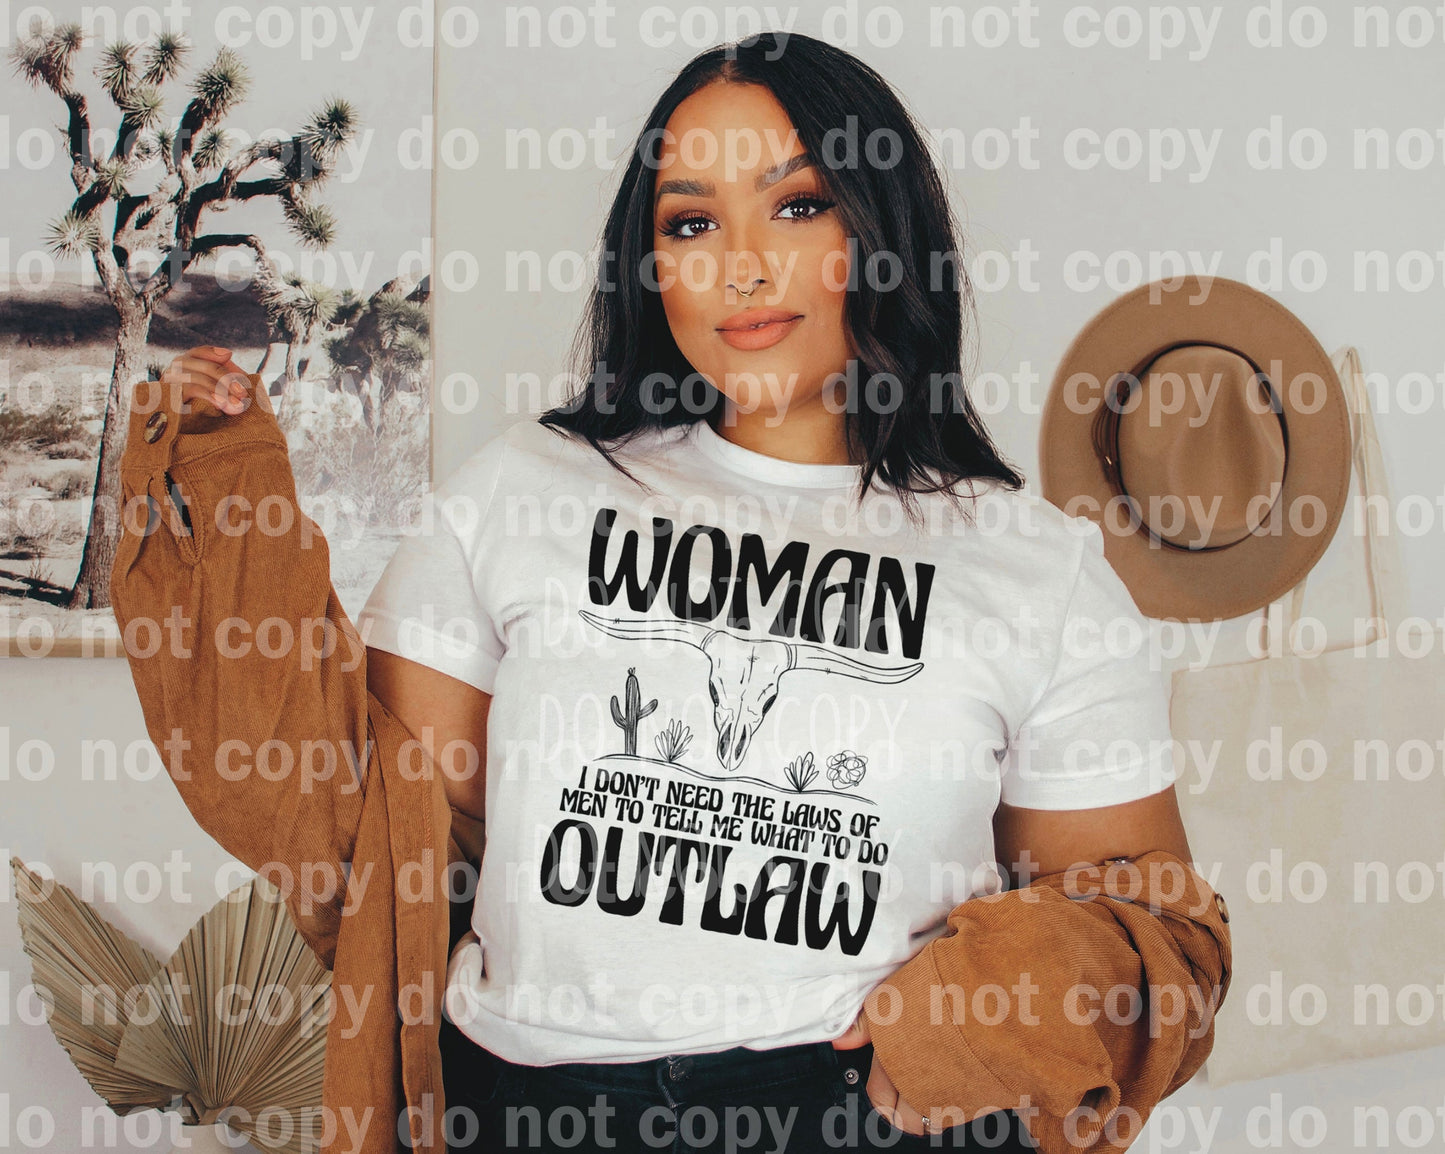 I Don't Need The Laws Of Men To Tell Me What To Do Women Outlaw Dream Print or Sublimation Print